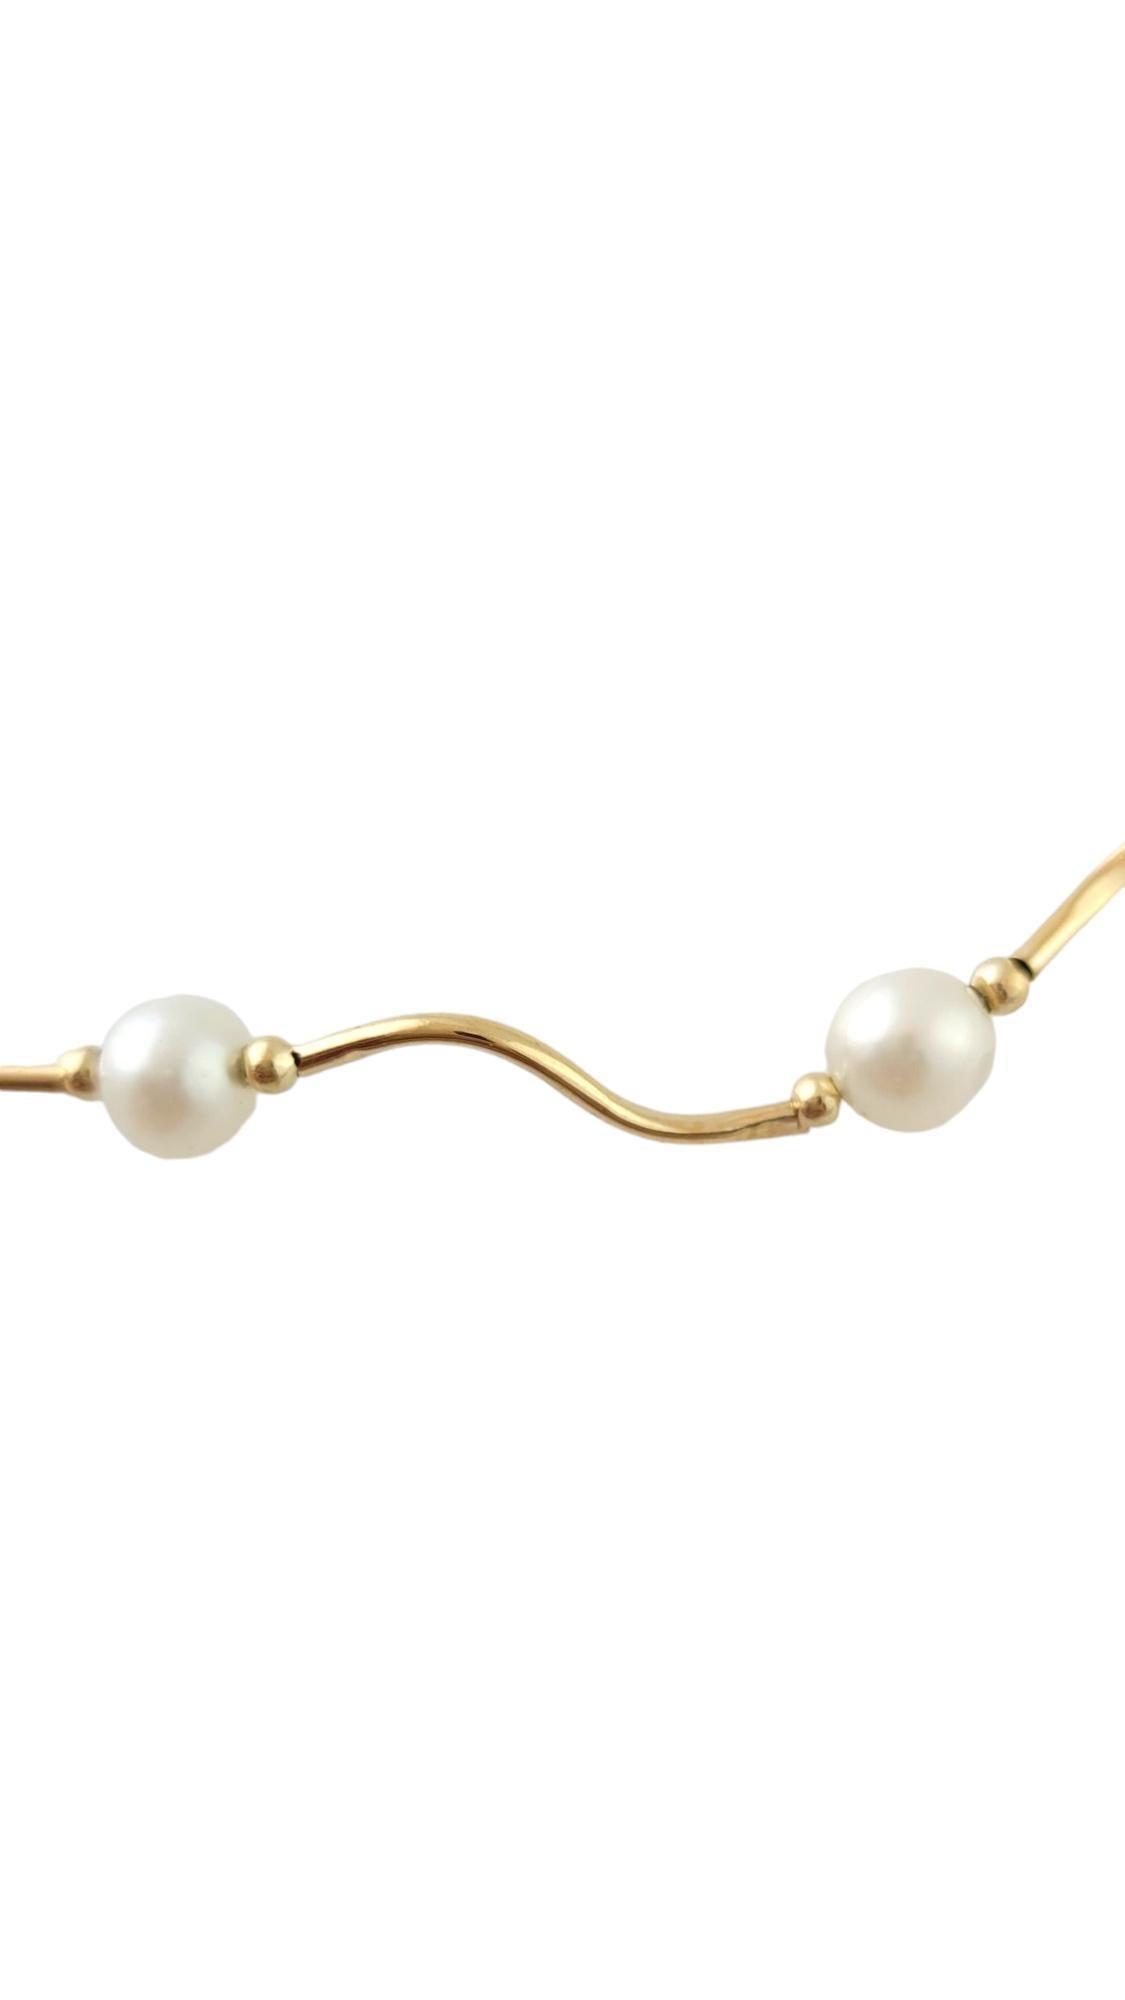 14K Yellow Gold Pearl Necklace #17337

This gorgeous pearl necklace is crafted from 14K yellow gold and features 16 beautiful pearls!
(Pearls approximately 5.7mm each)

Length: 15.5mm

Weight: 3.53 dwt/ 5.48 g

Hallmark: 14K

Very good condition,